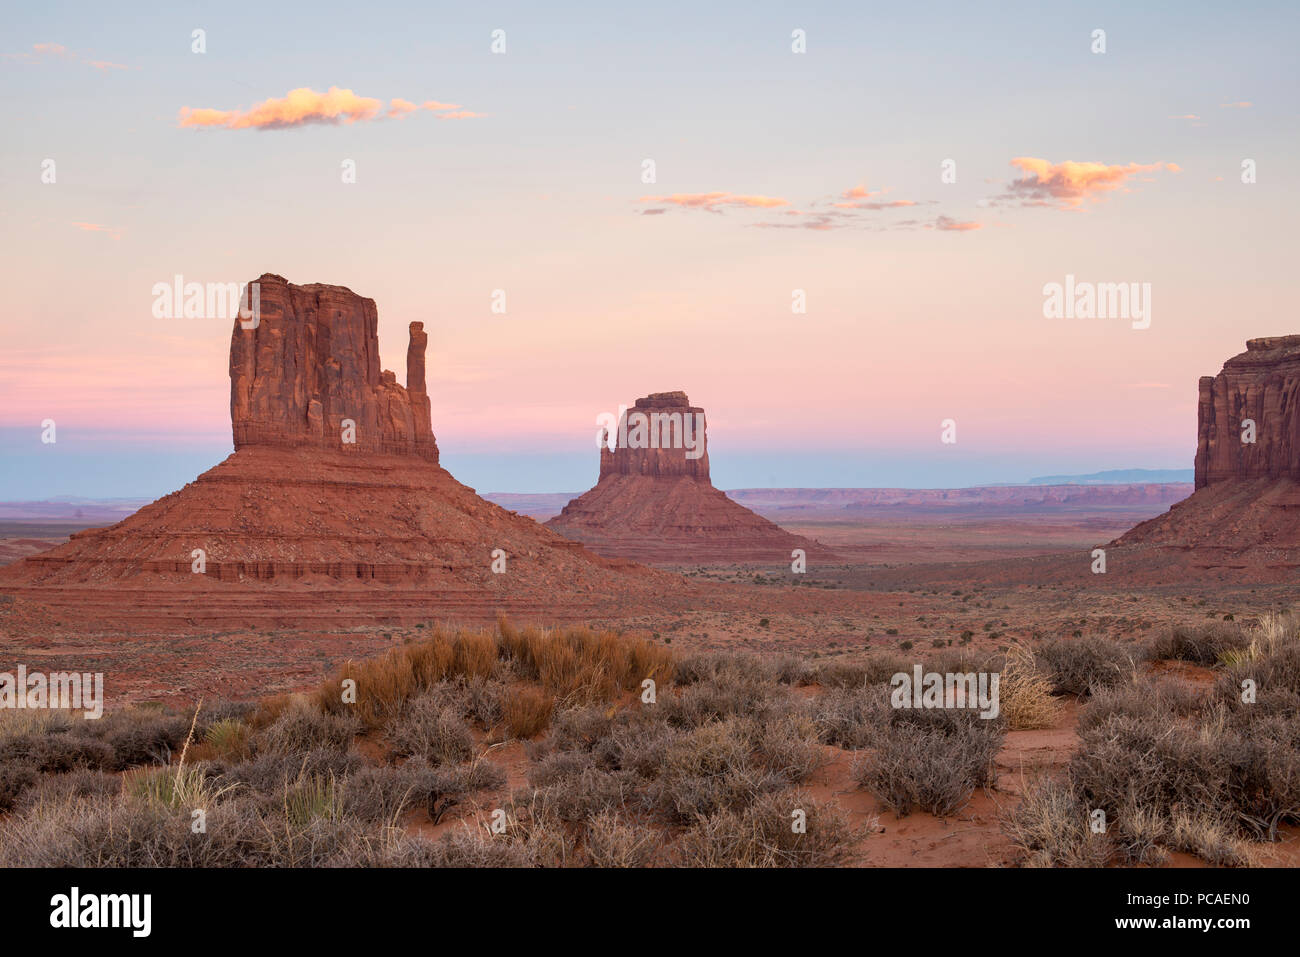 The giant sandstone buttes glowing pink at sunset in Monument Valley Navajo Tribal Park, Arizona, United States of America, North America Stock Photo